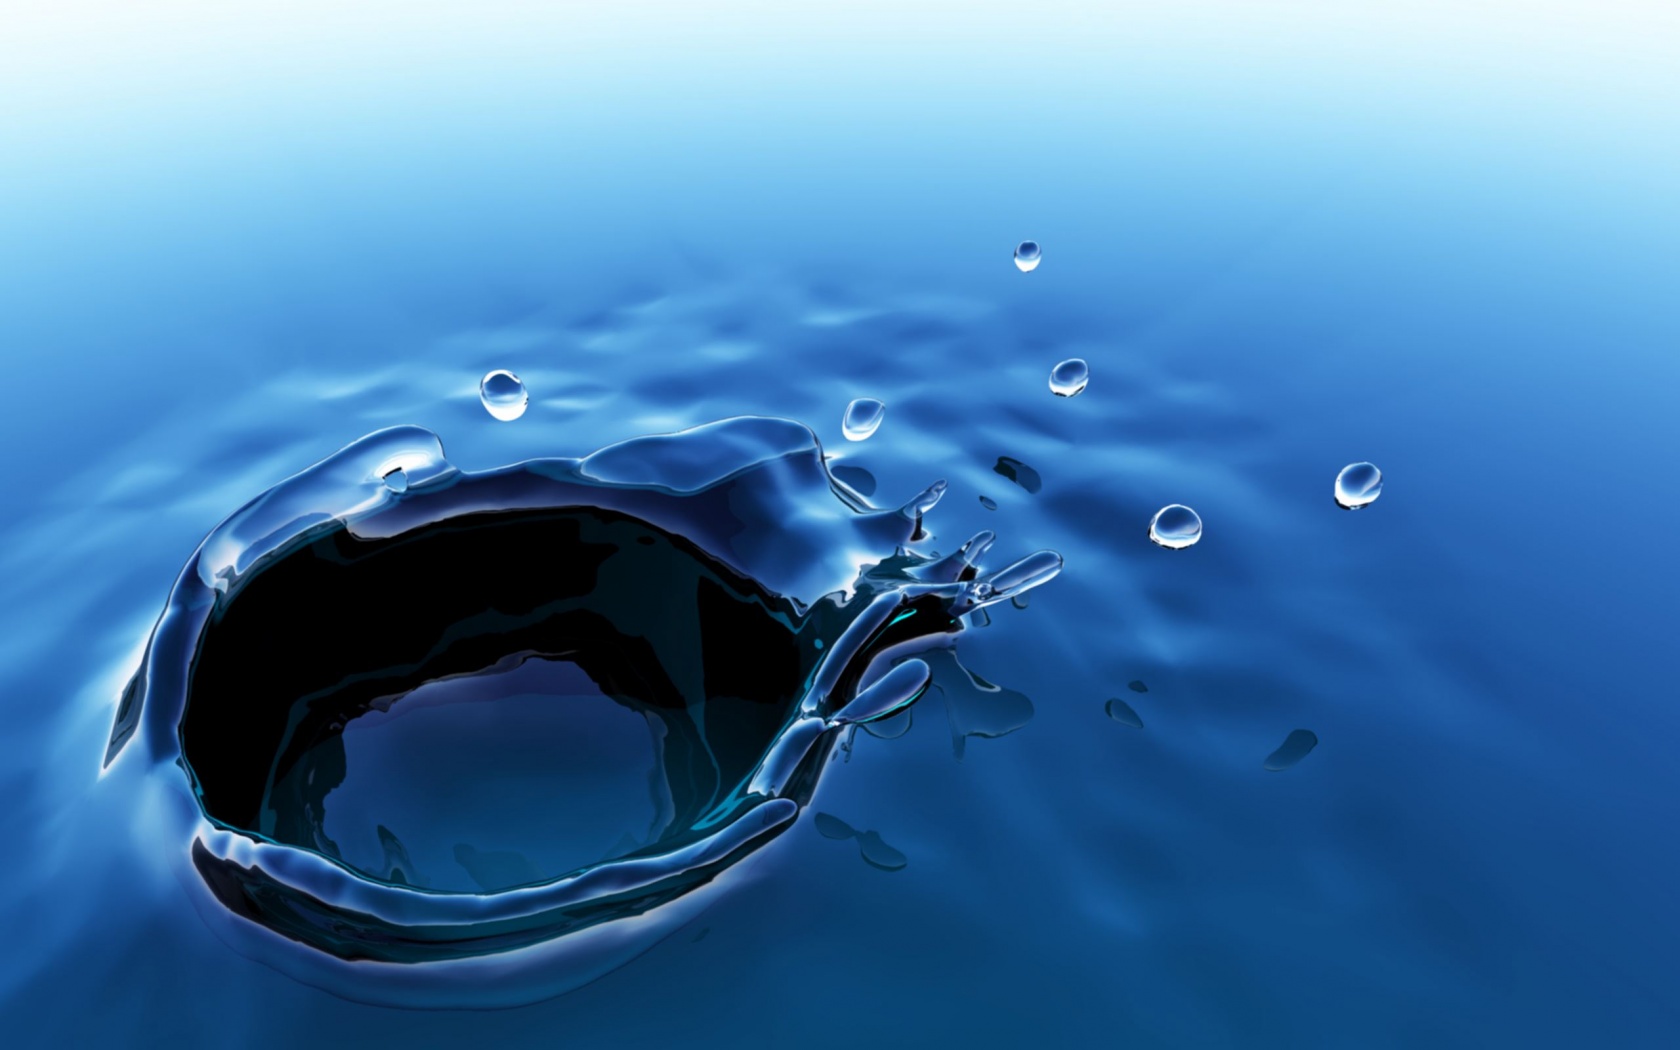 Free download 3d water background wallpaper cool 3d water